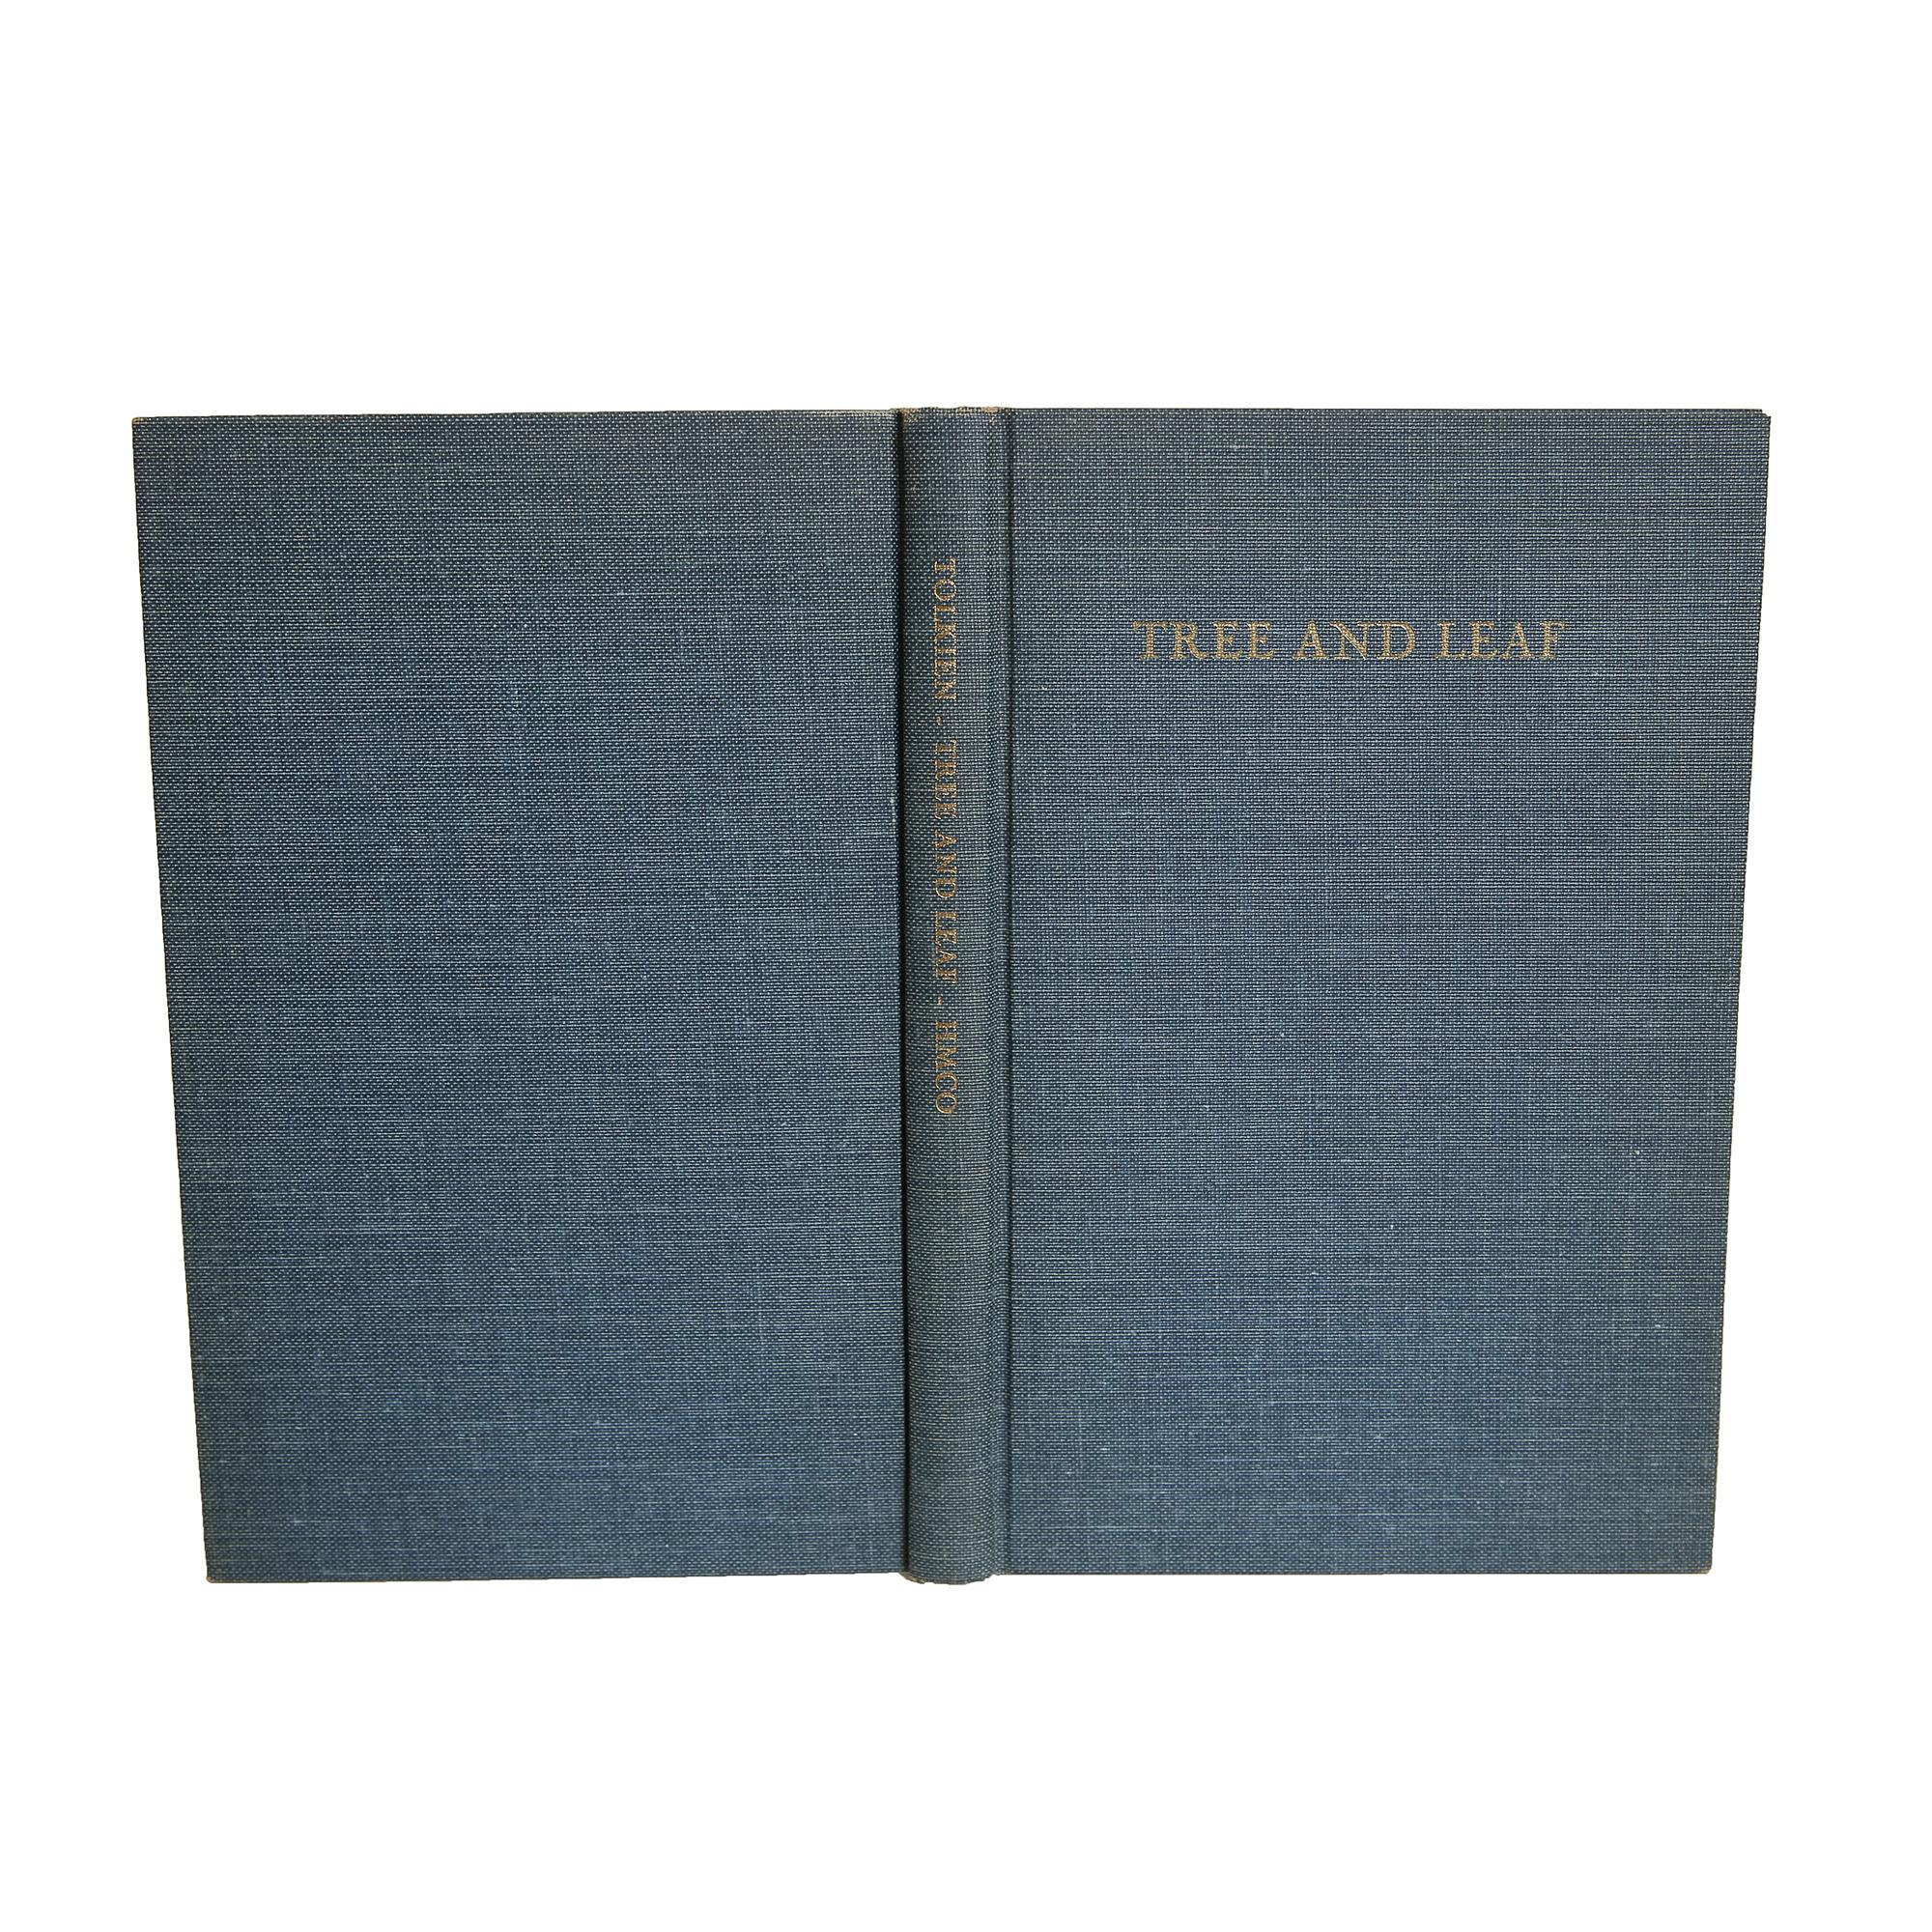 J. R. R. Tolkien's Tree and Leaf, 1965 For Sale 6